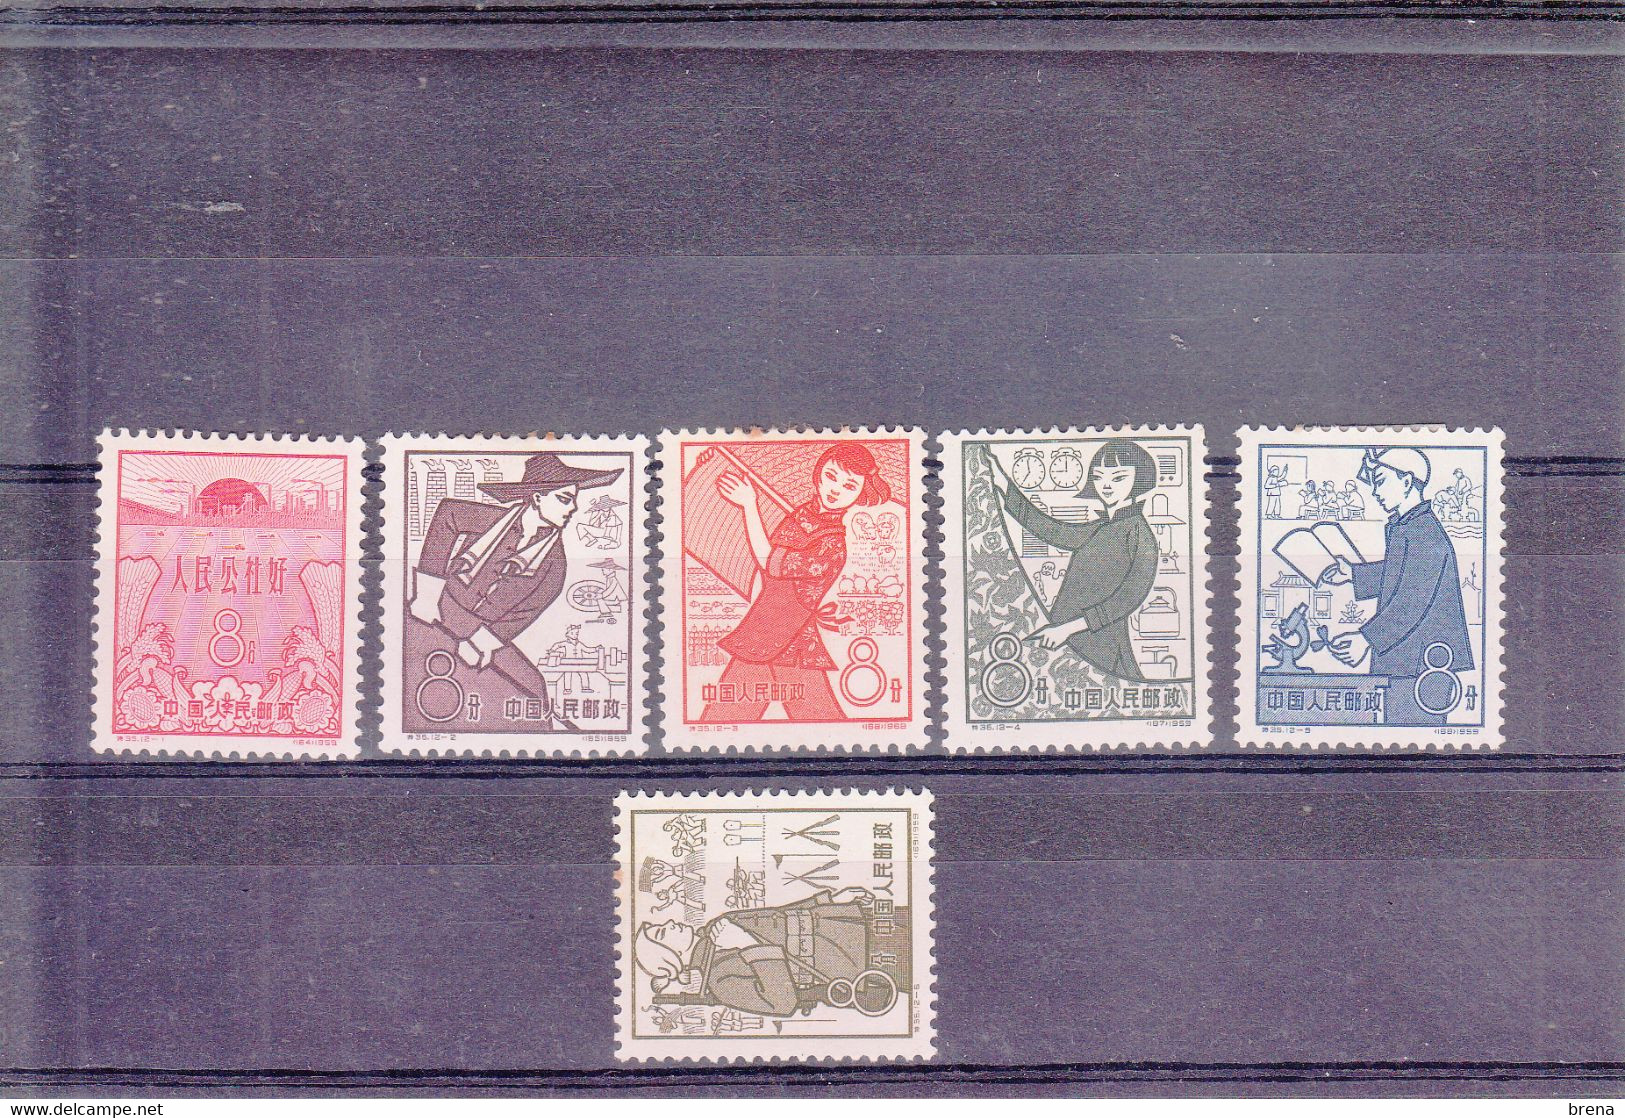 CHINE 1959   COMMUNES POPULAIRES   N°1212 A 1217  SERIE INCOMPLETE  NEUFS X - Unused Stamps